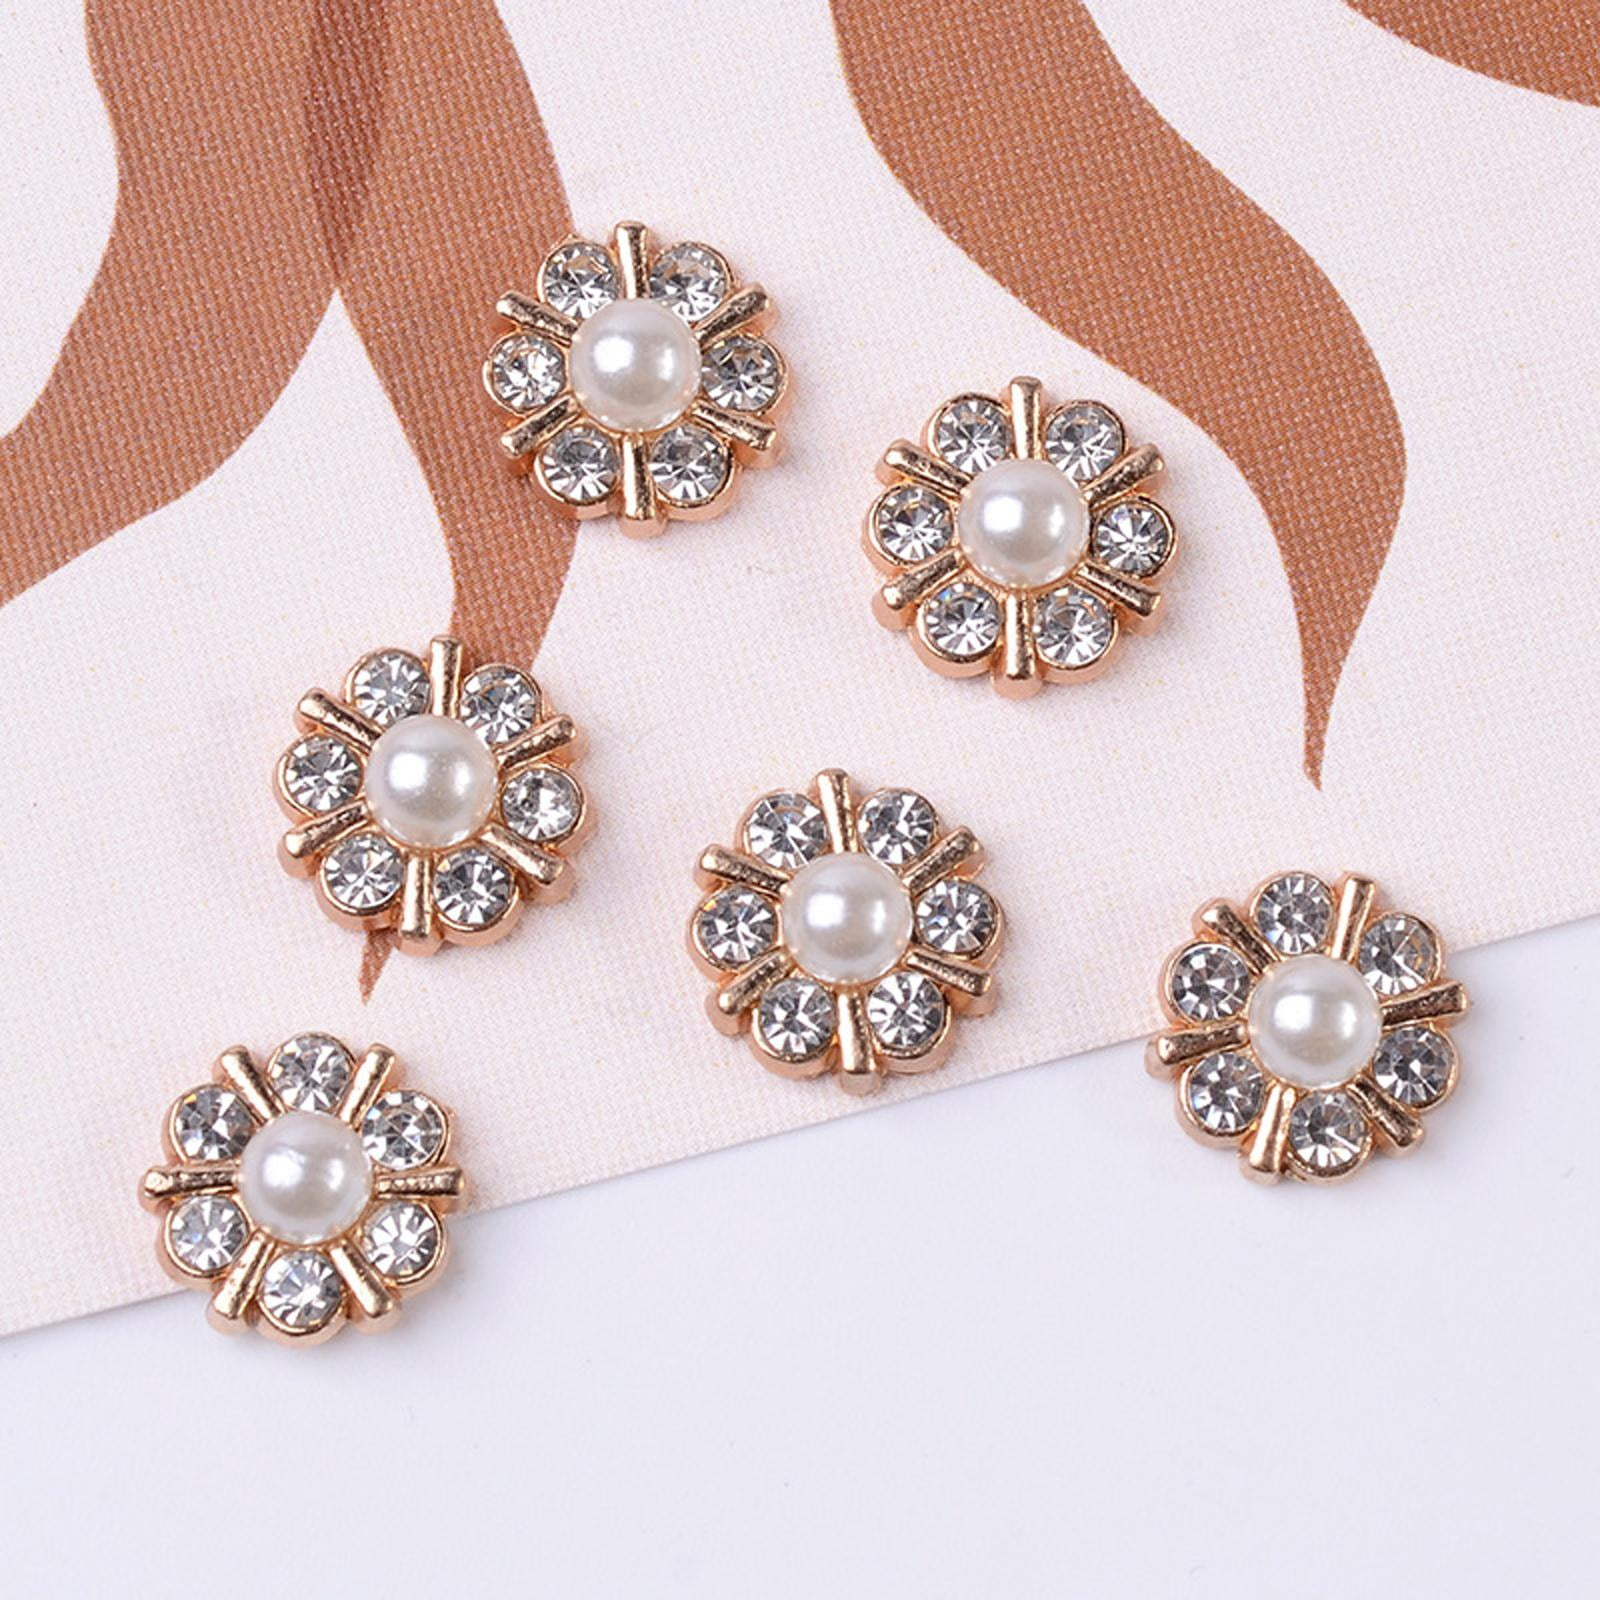 70 Pcs 16mm Rhinestone Embellishments Flatback Buttons Jewelry Flower  Crystal Accessory for Crafts DIY Jewelry Making Wedding Decoration Bridal  Bouquet Halloween Christmas Invitations(Silver)